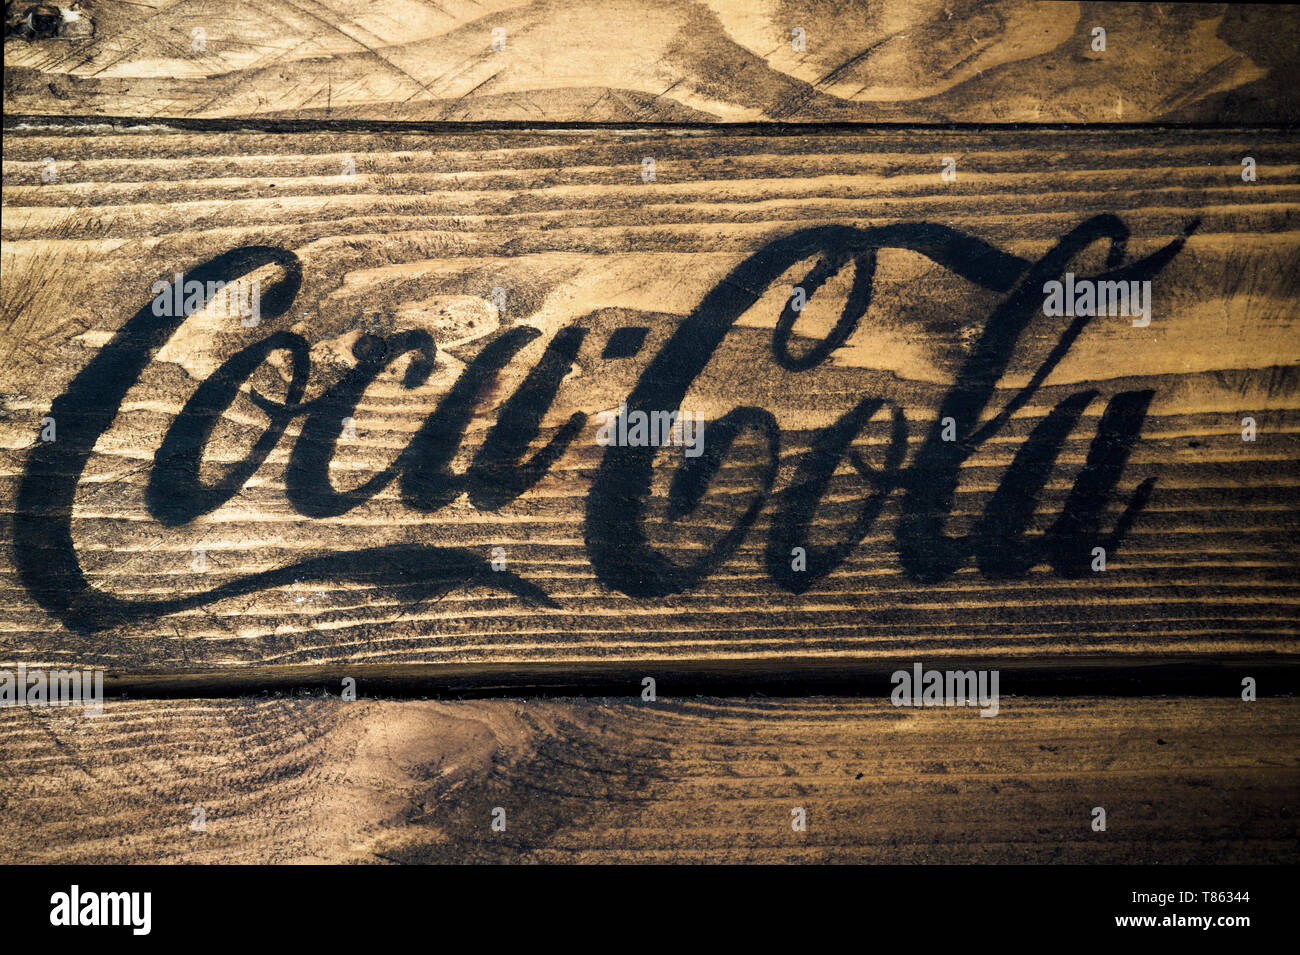 Black Coca cola logo painted on rustic weathered wood Stock Photo